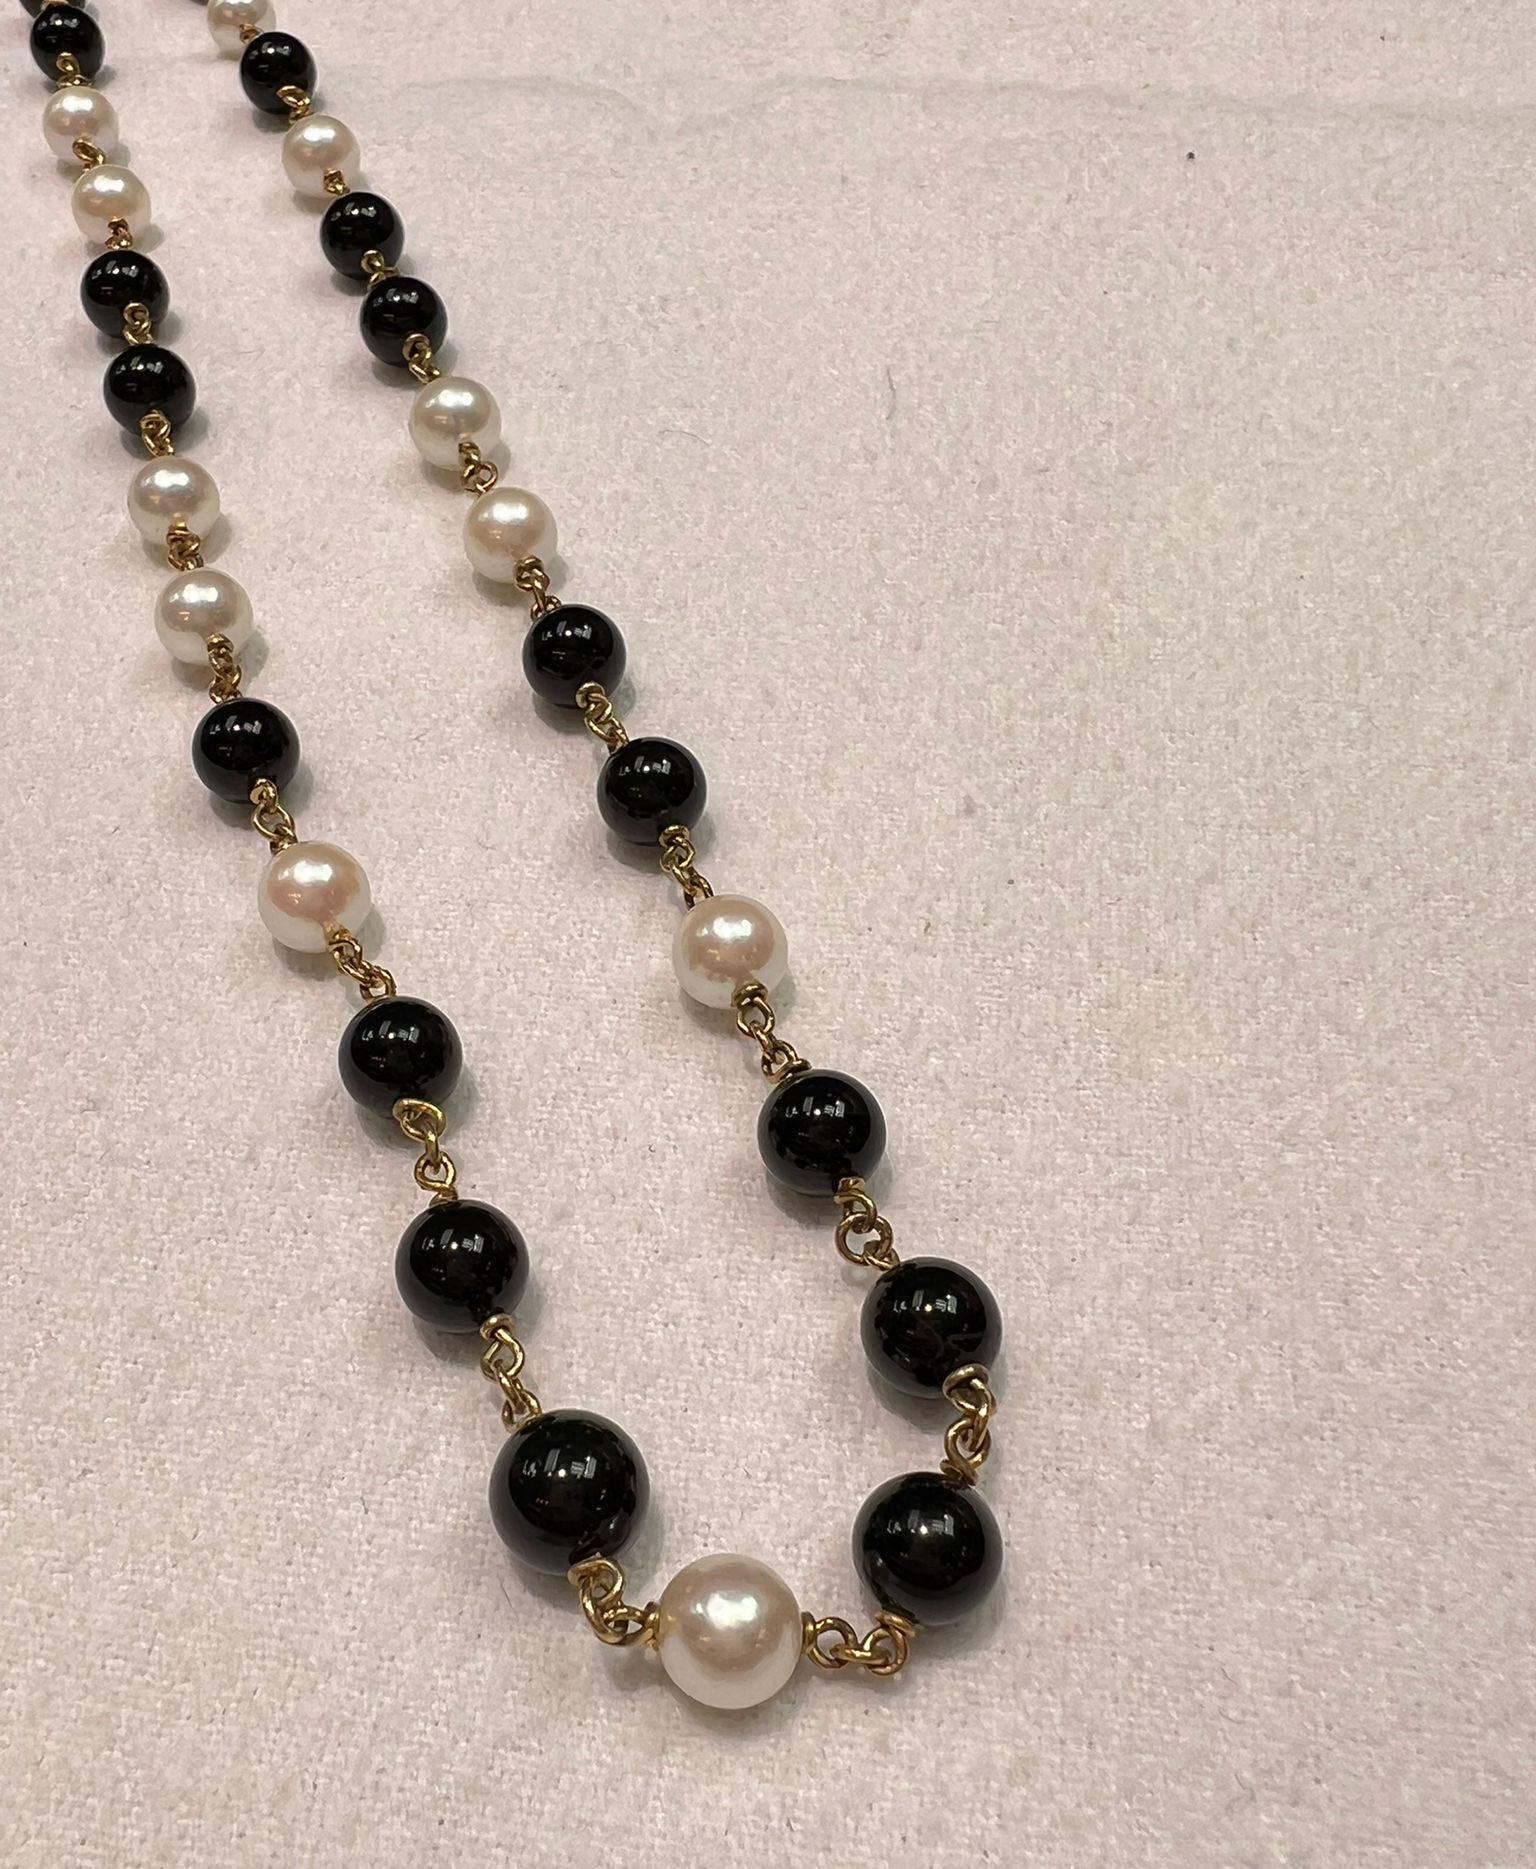 Onyx and Akoya Pearls with Silver Chain and Silver Clasp In Excellent Condition For Sale In LA, CA